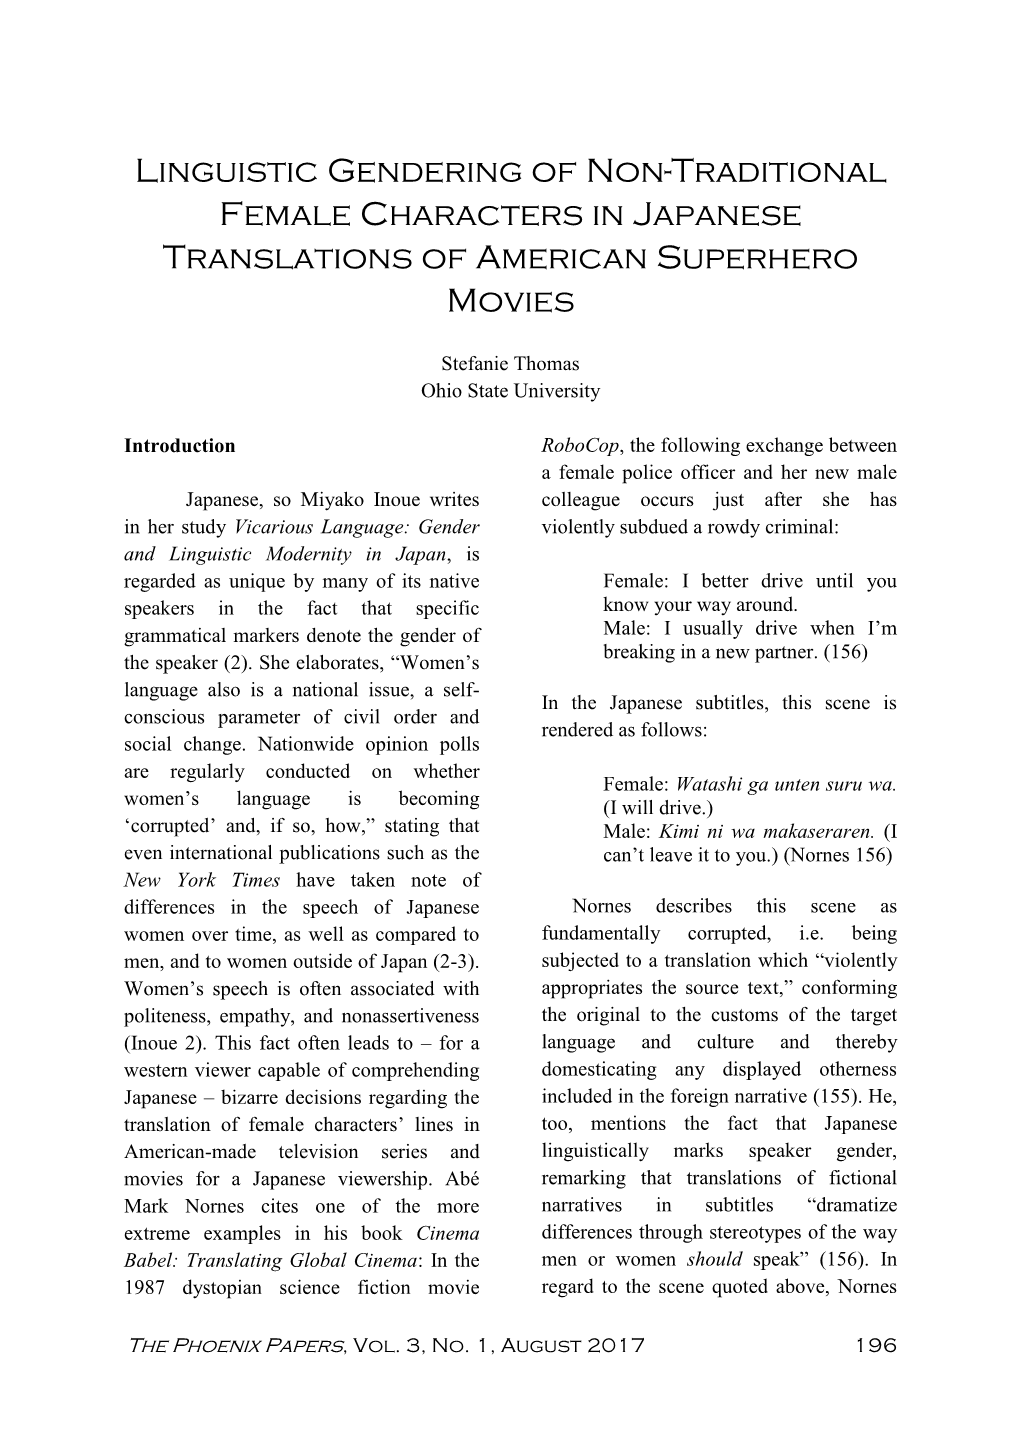 Linguistic Gendering of Non-Traditional Female Characters in Japanese Translations of American Superhero Movies